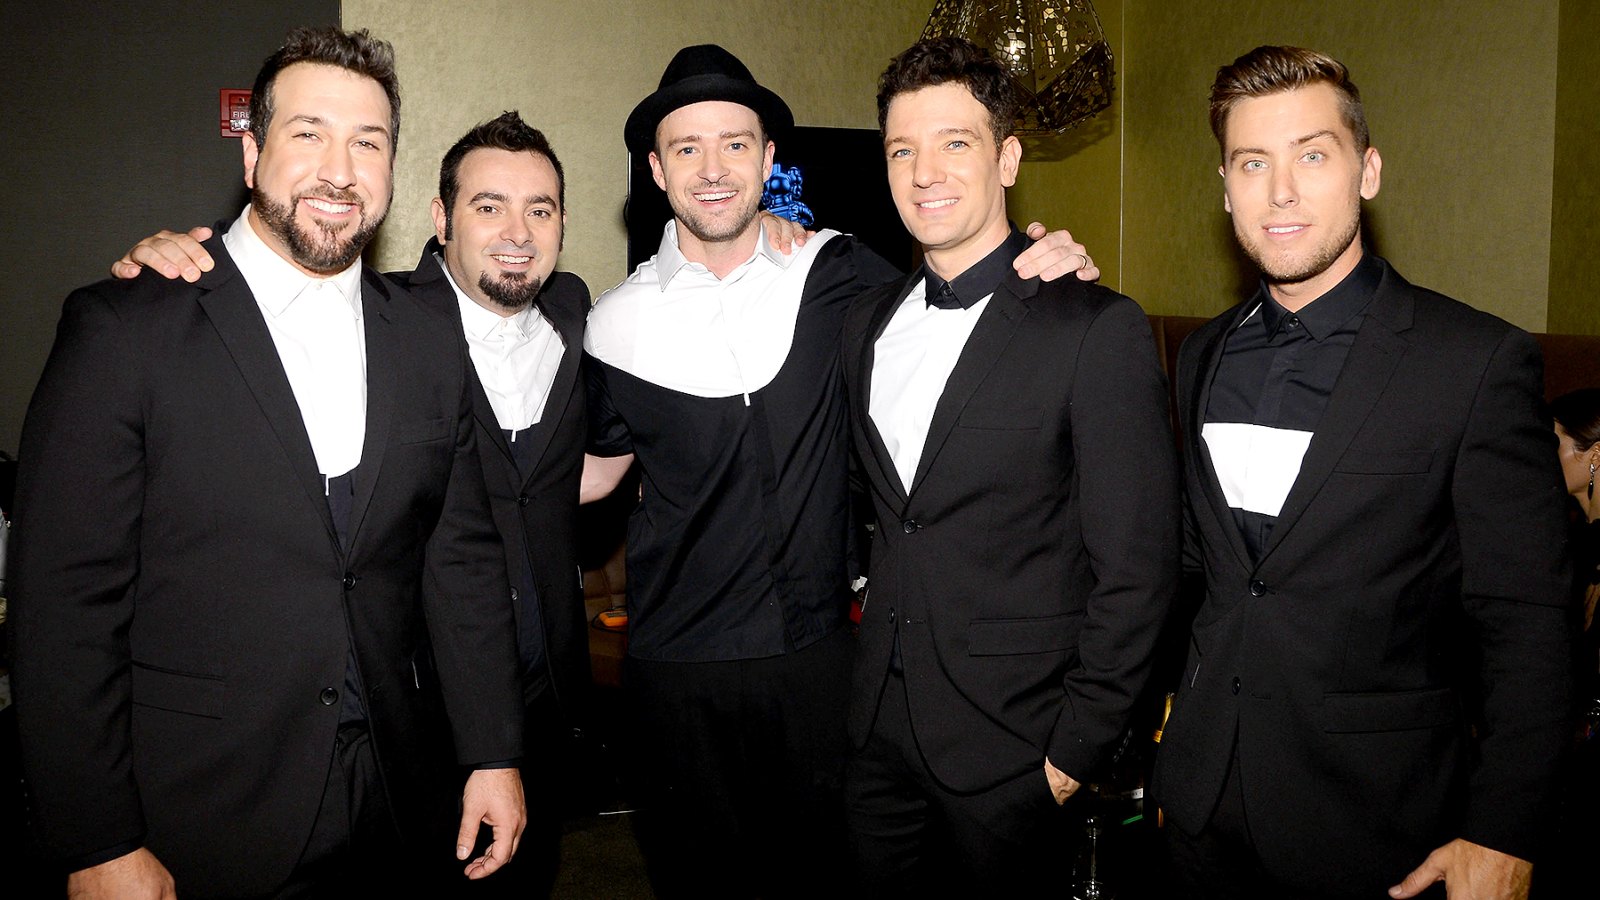 Joey Fatone, Chris Kirkpatrick, Justin Timberlake, JC Chasez and Lance Bass of N'Sync attend the 2013 MTV Video Music Awards at the Barclays Center on August 25, 2013 in the Brooklyn borough of New York City.